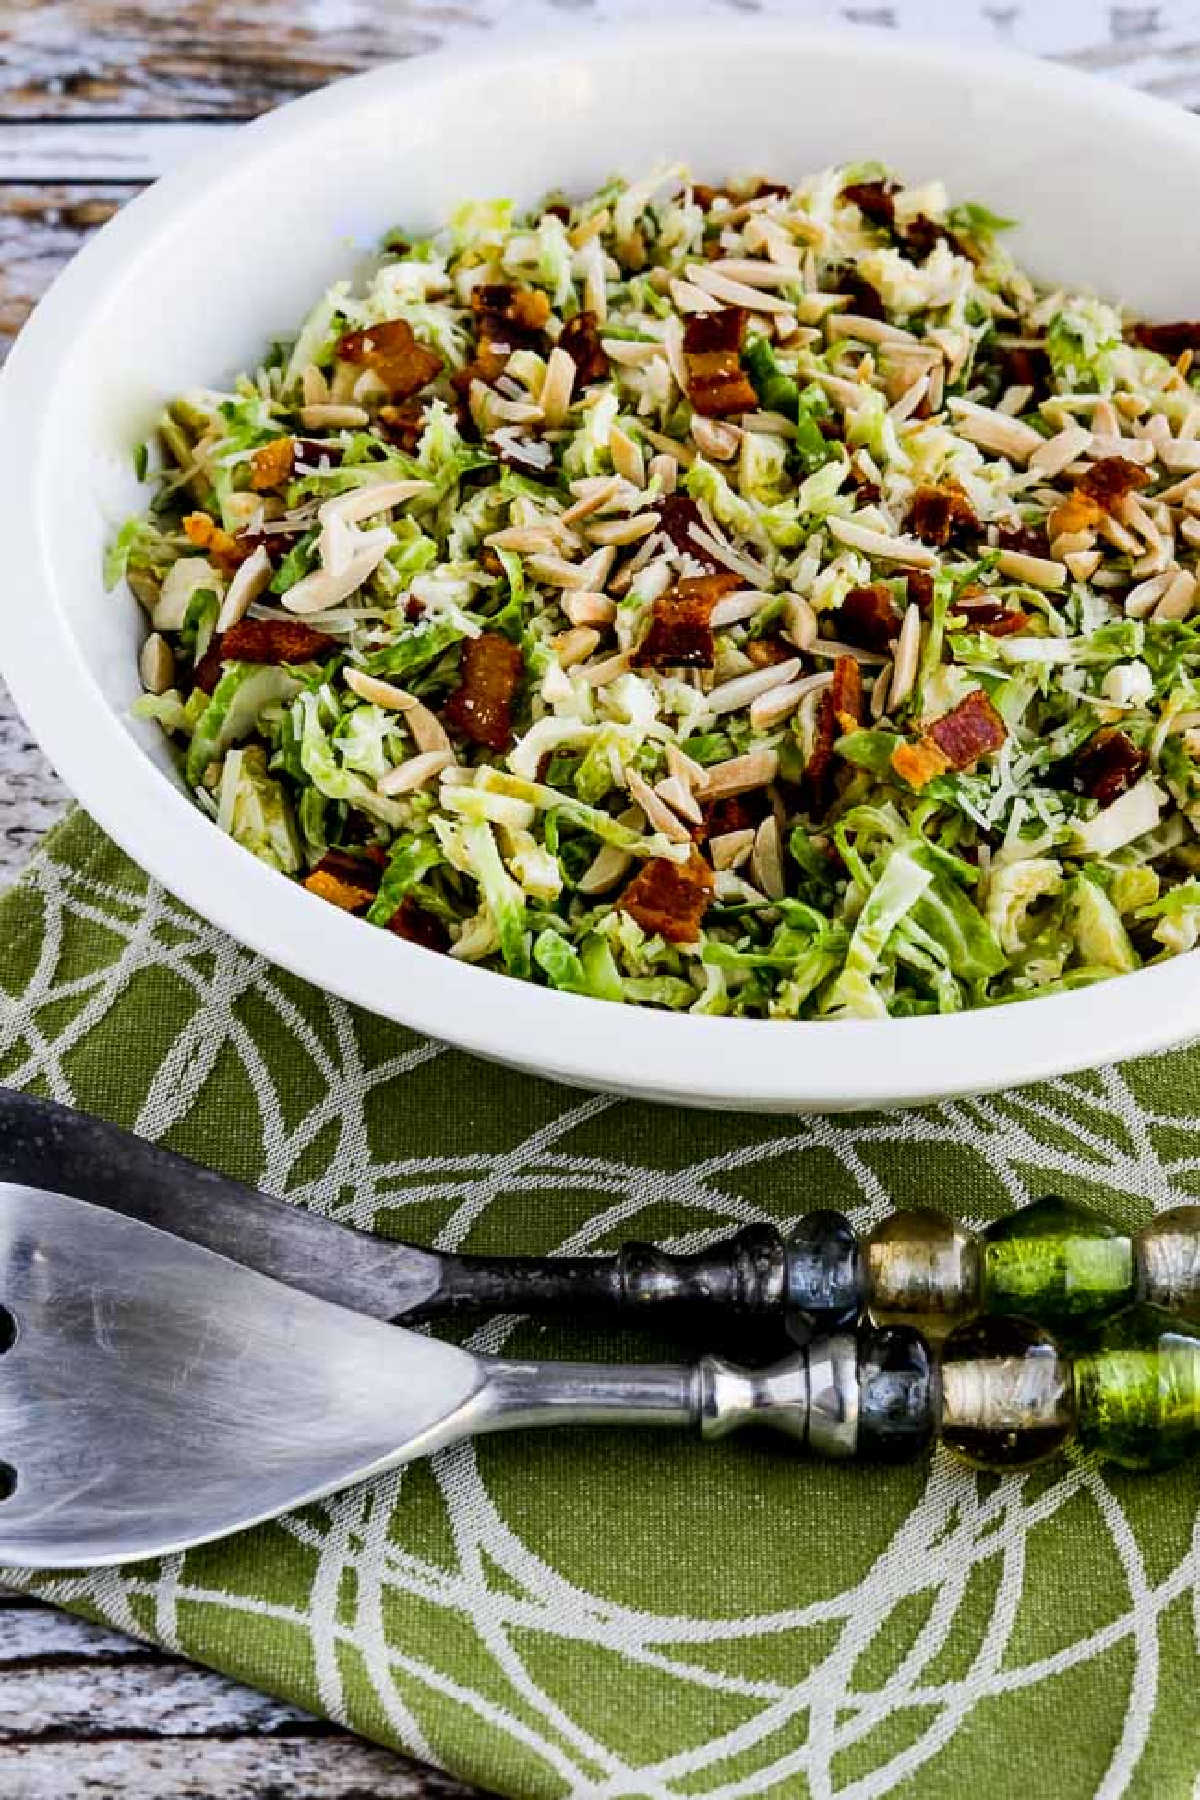 Brussels Sprouts Salad with Bacon, Almonds, and Parmesan shown in serving dish